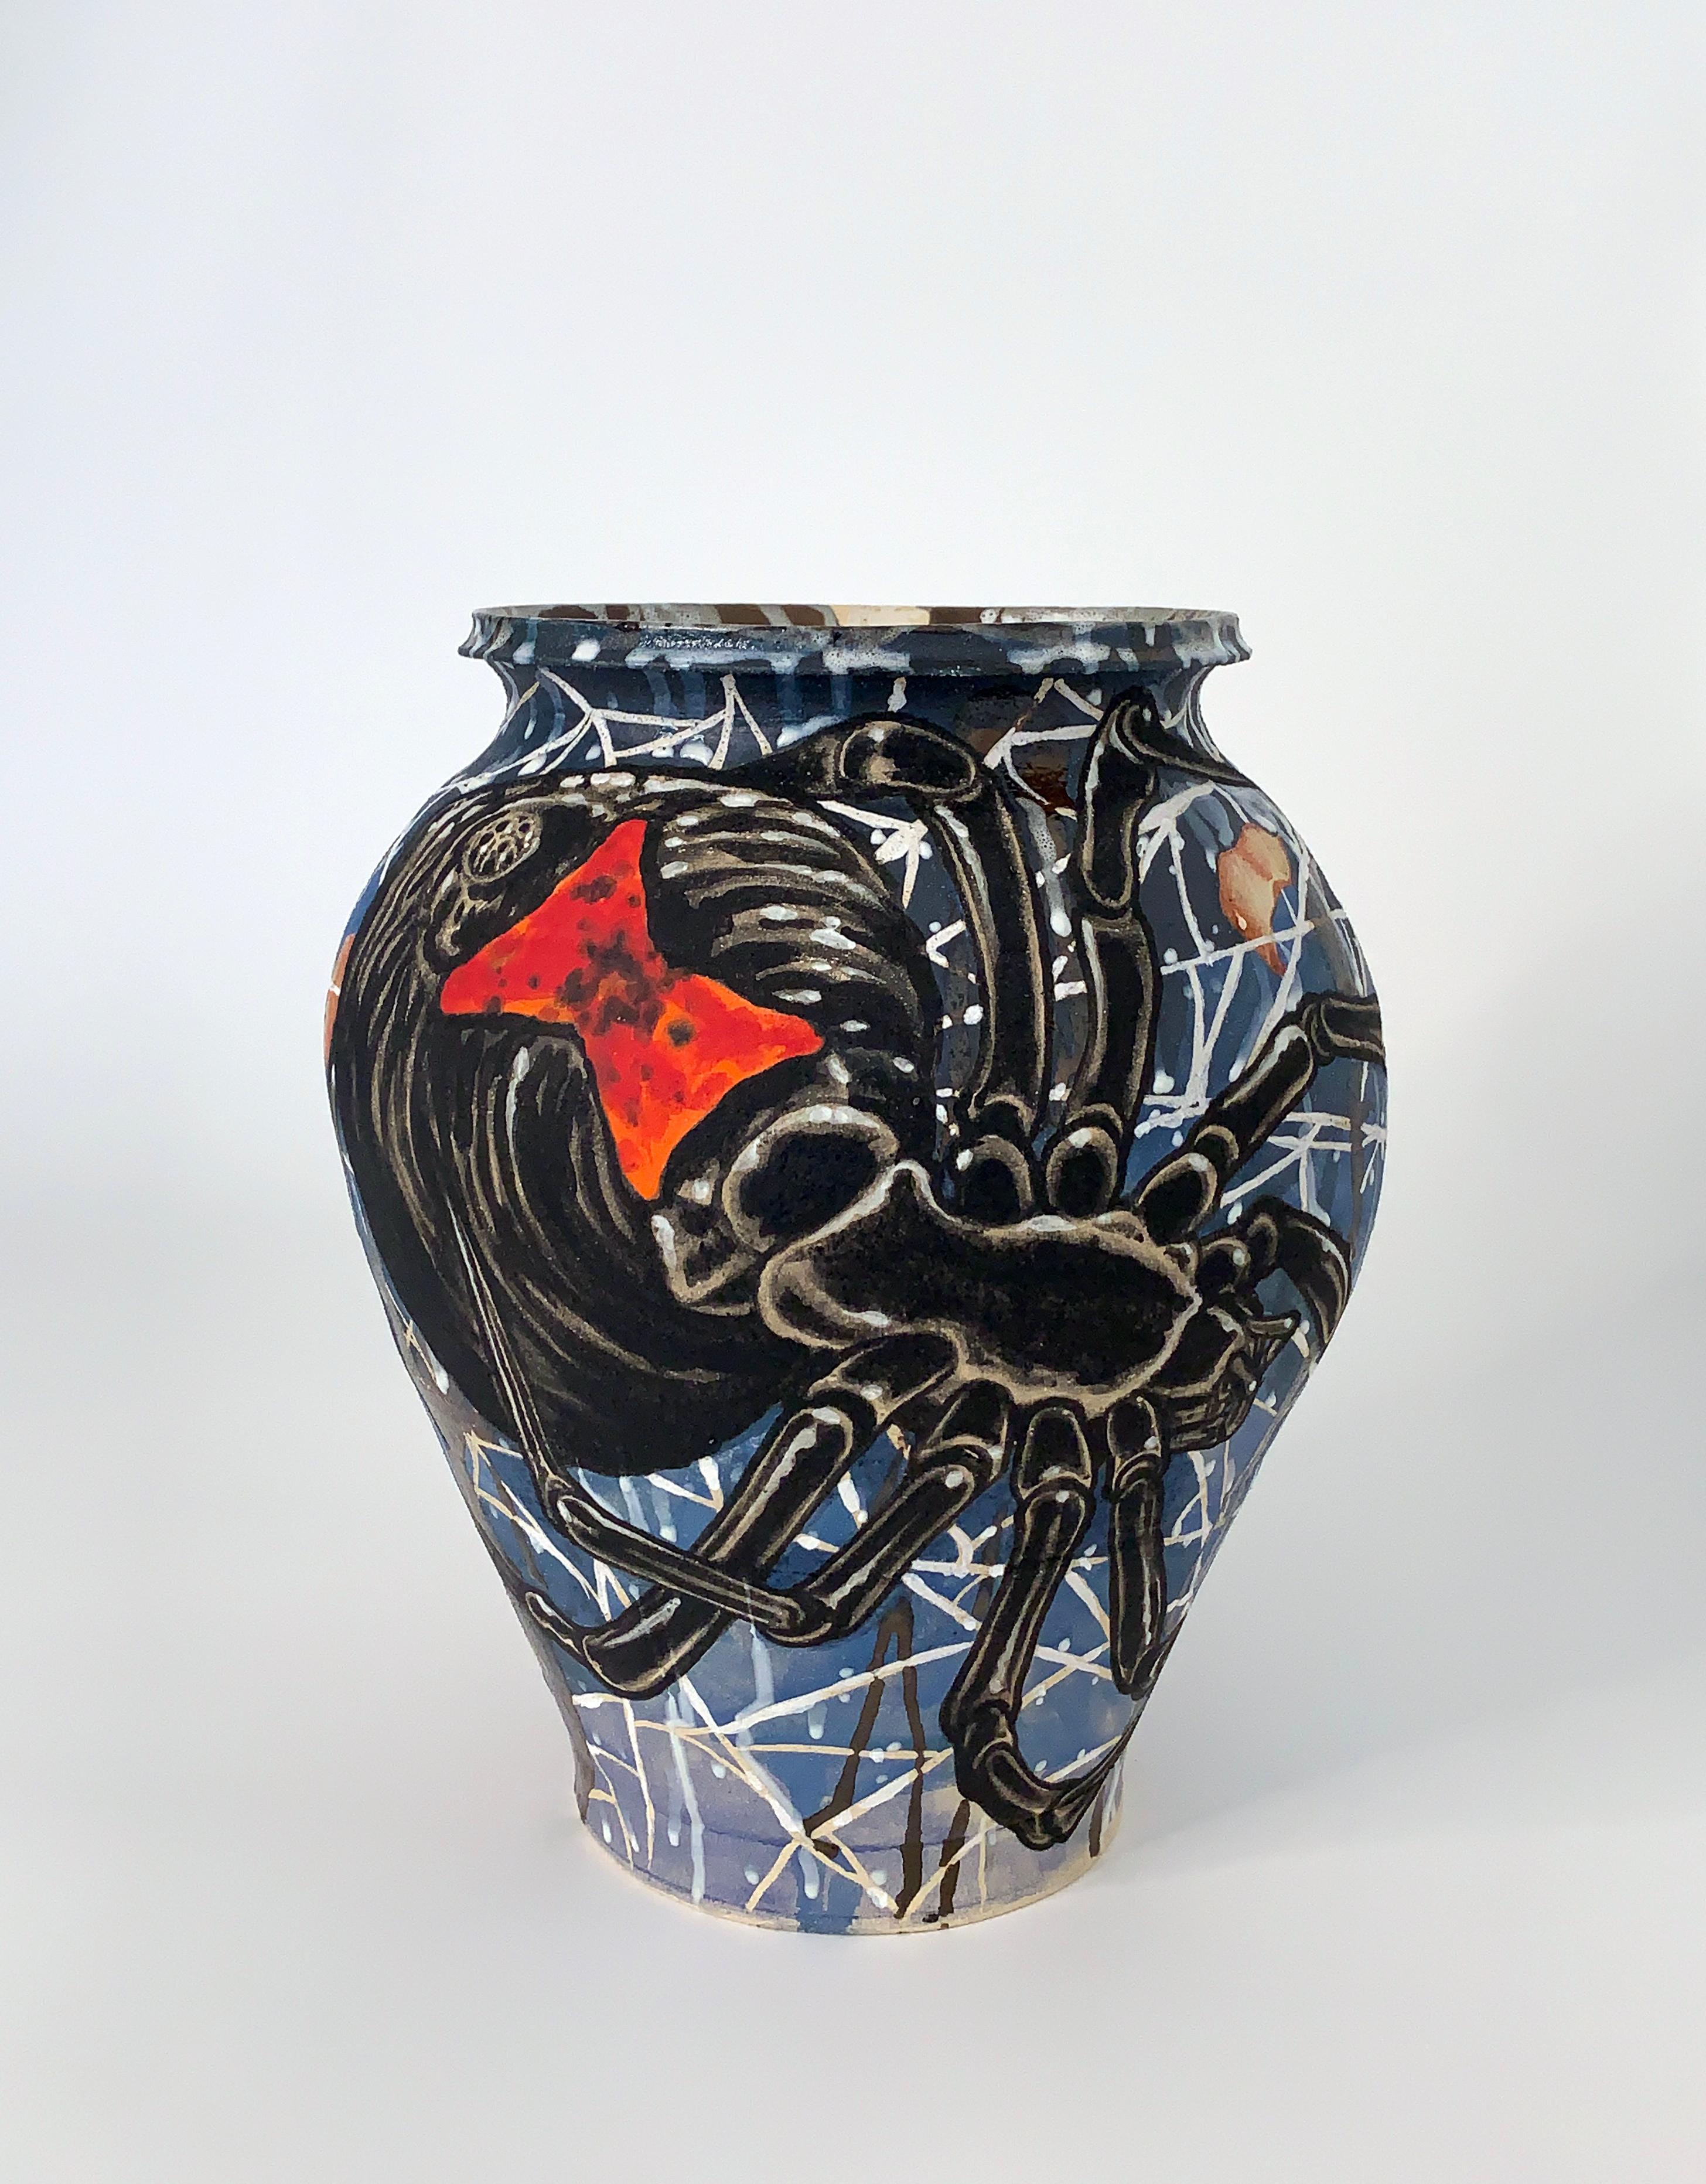 Bryan Burk Animal Painting - "Insure Domestic Tranquility", Contemporary, Ceramic, Vessel, Surface Painting